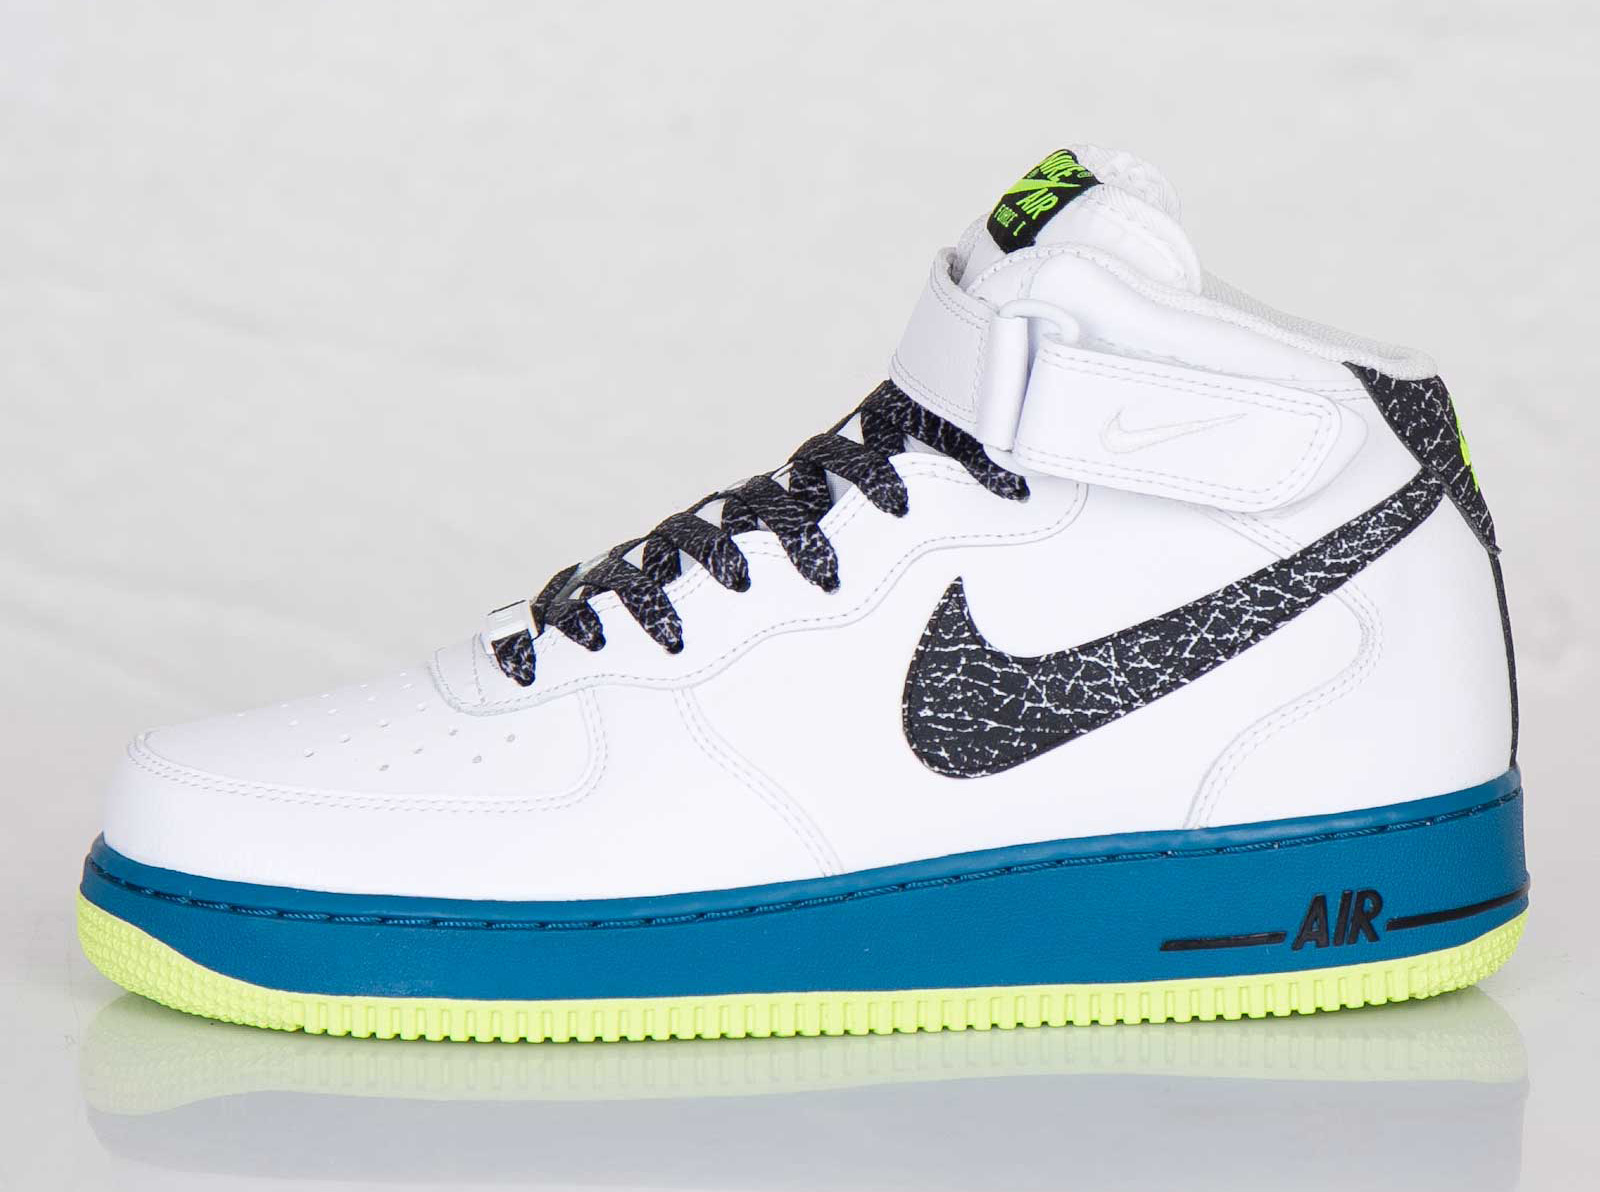 Nike Air Force 1 Mid - White - Black - Green Abyss - Volt